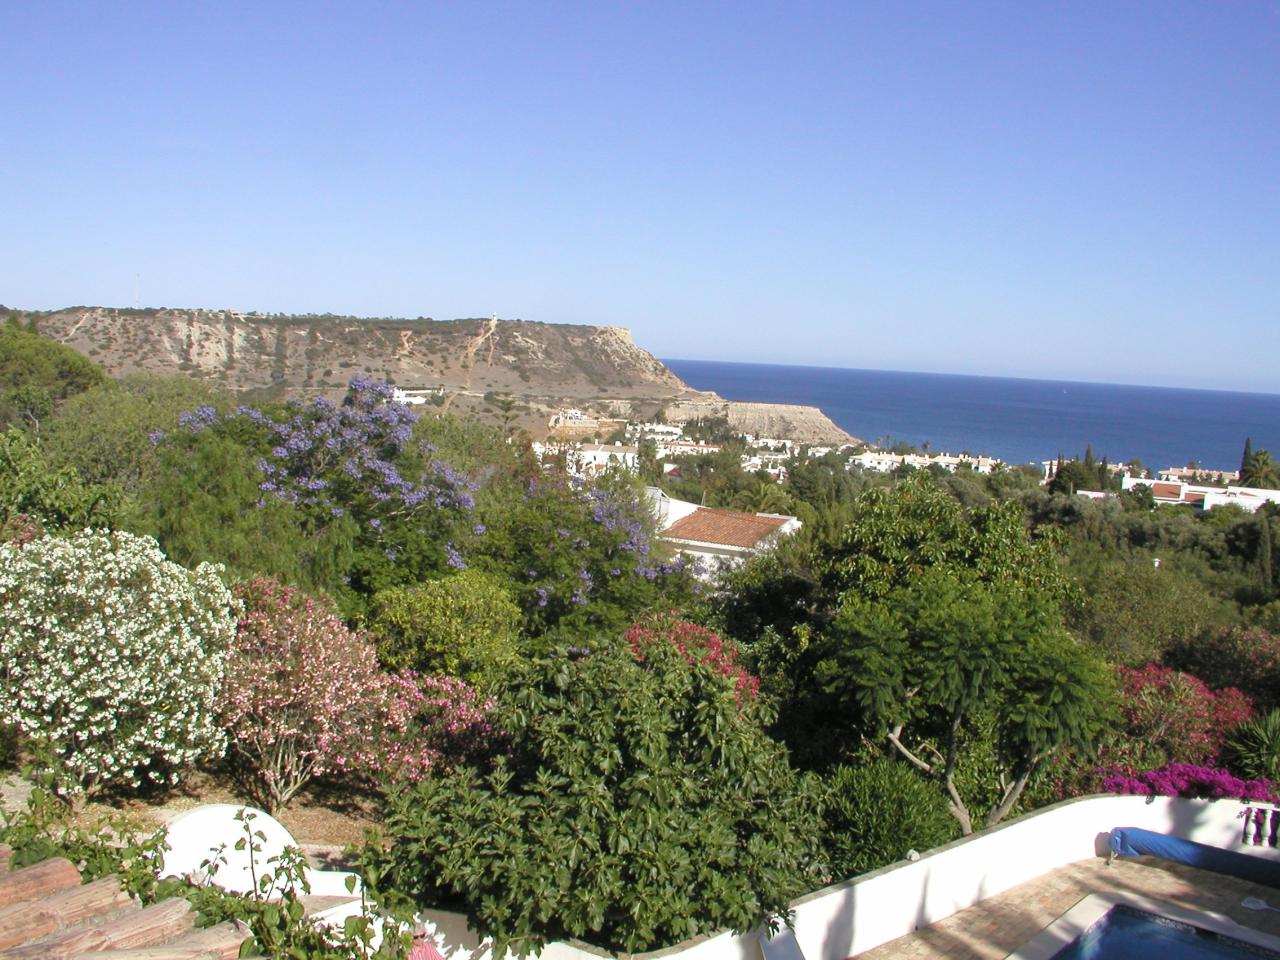 JPEG image - View from villa roof ...